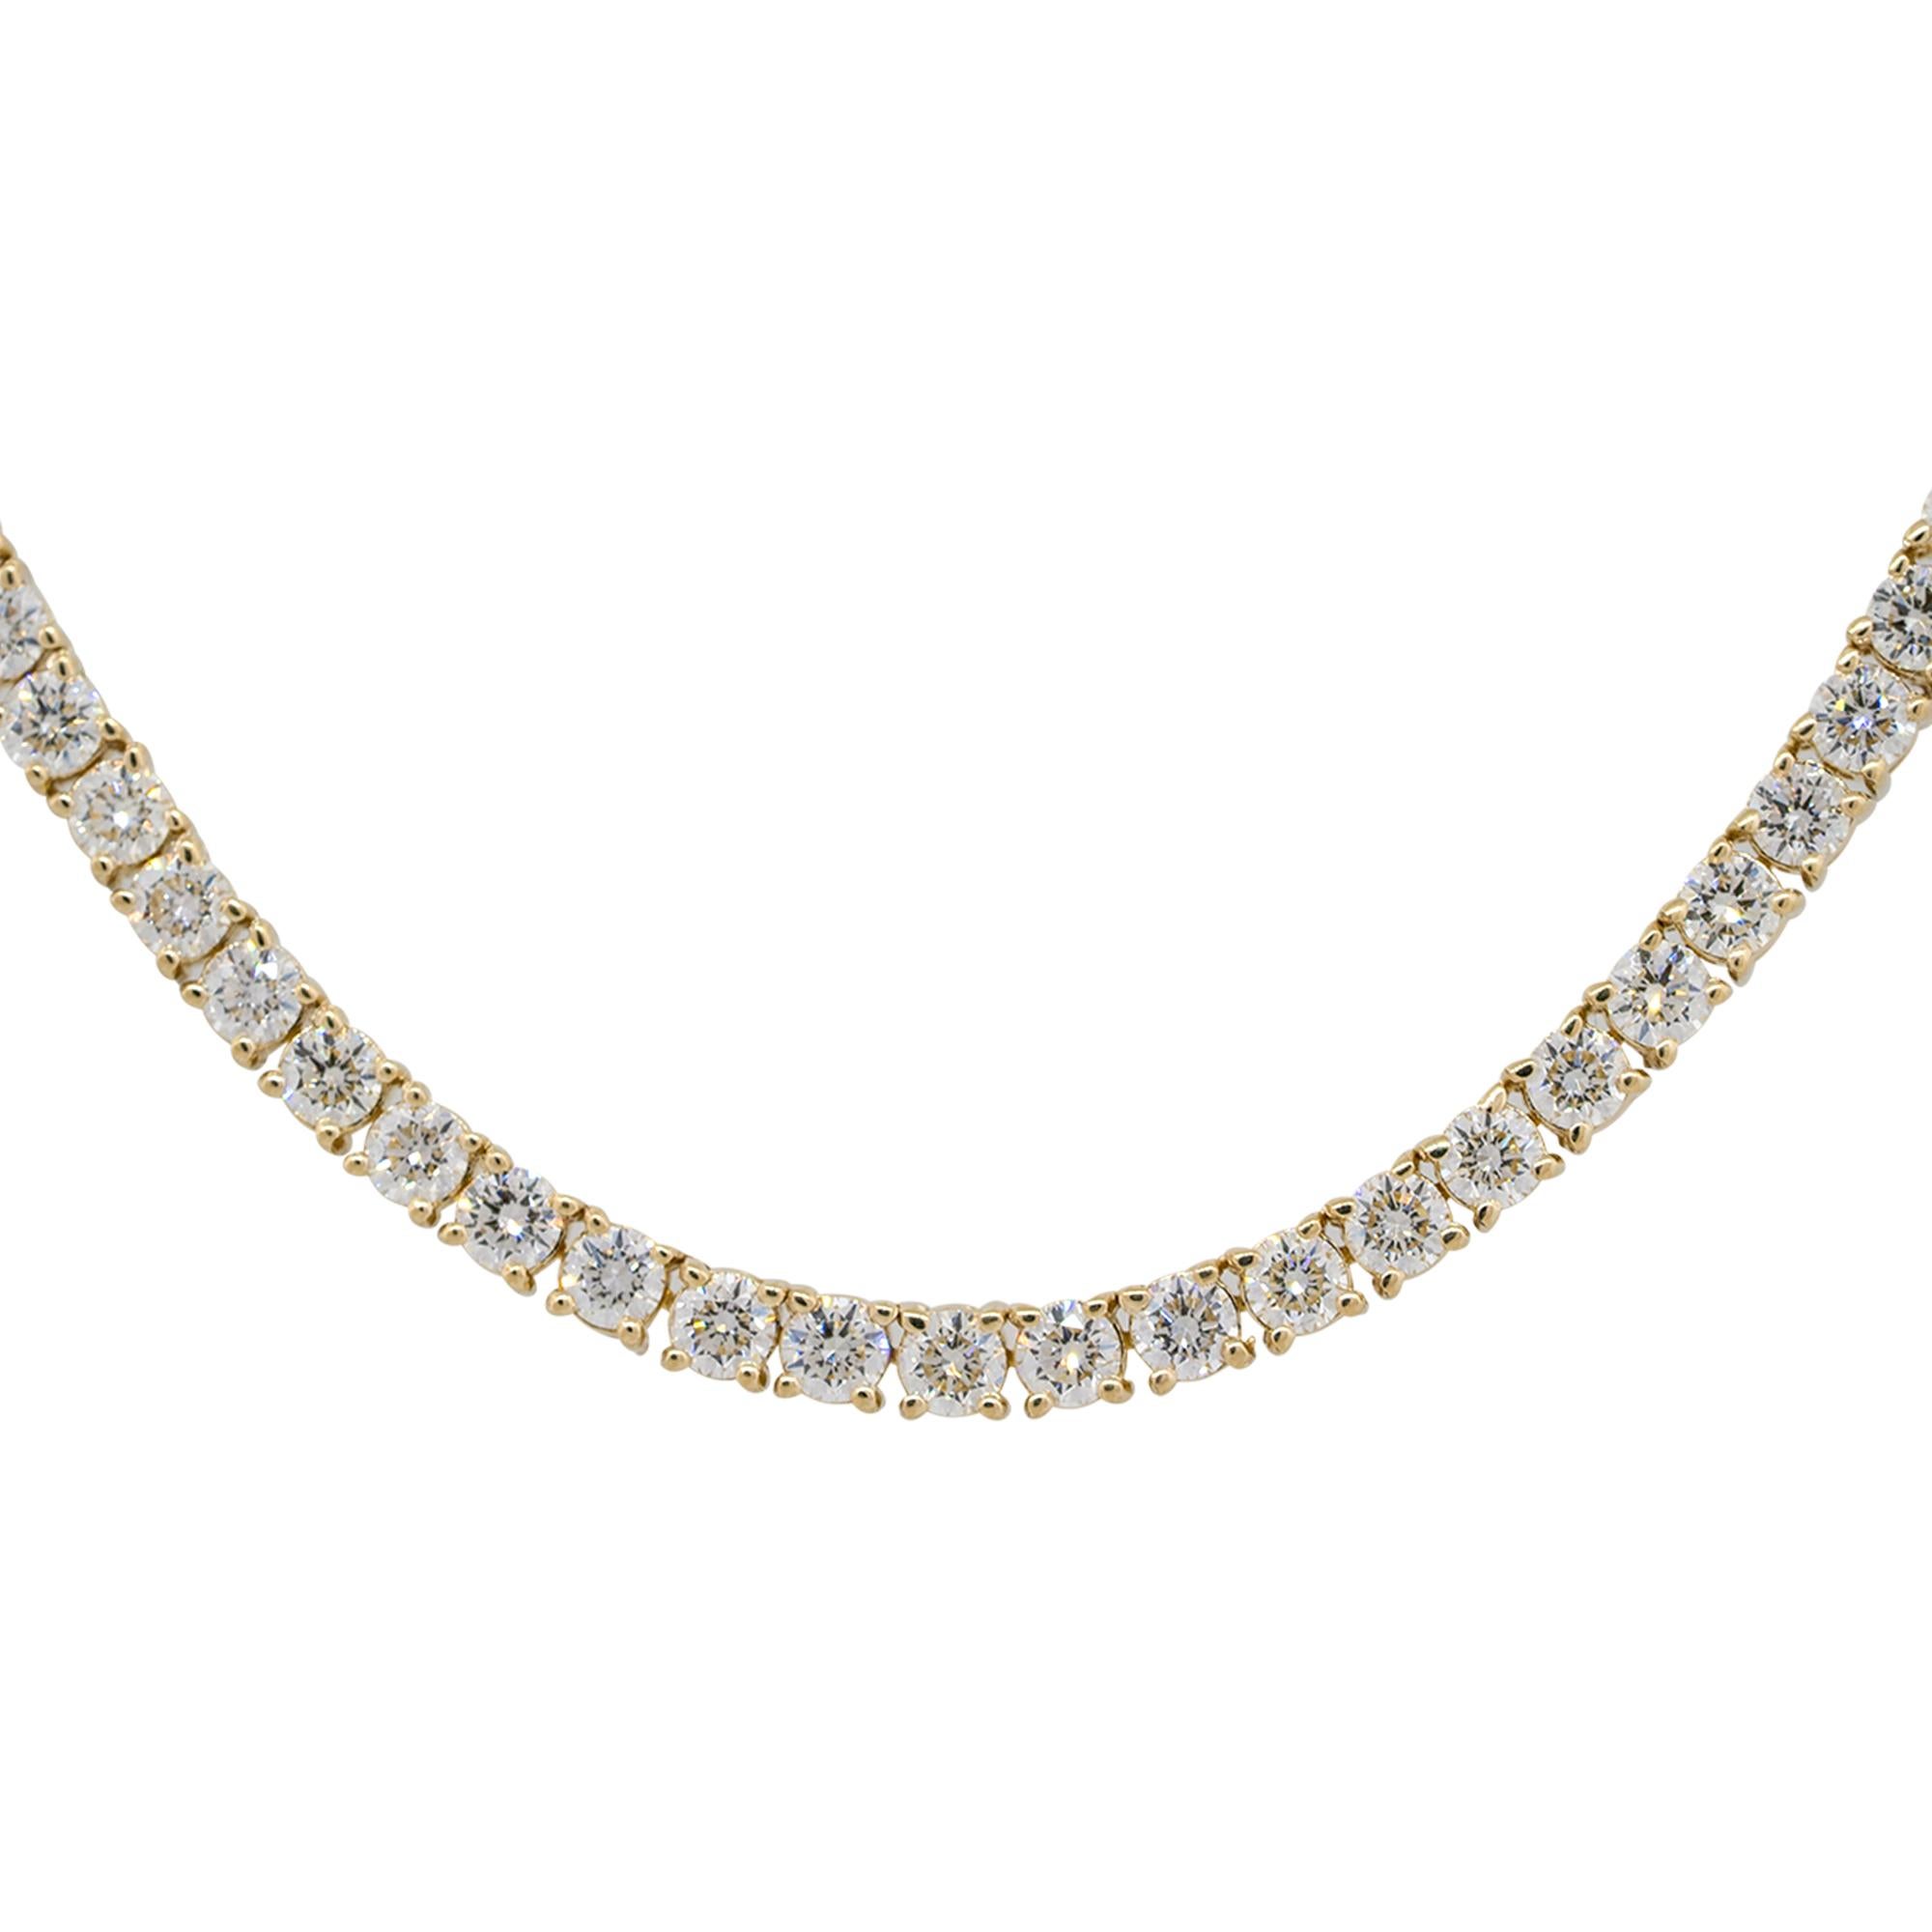 Material: 14k Yellow gold
Diamond Details: Approx. 6.76ctw of round cut Diamonds. Diamonds are G/H in color and VS in clarity
Clasps: Tongue in box with safety clasp
Total Weight: 14.7g (9.5dwt)
Length: 17